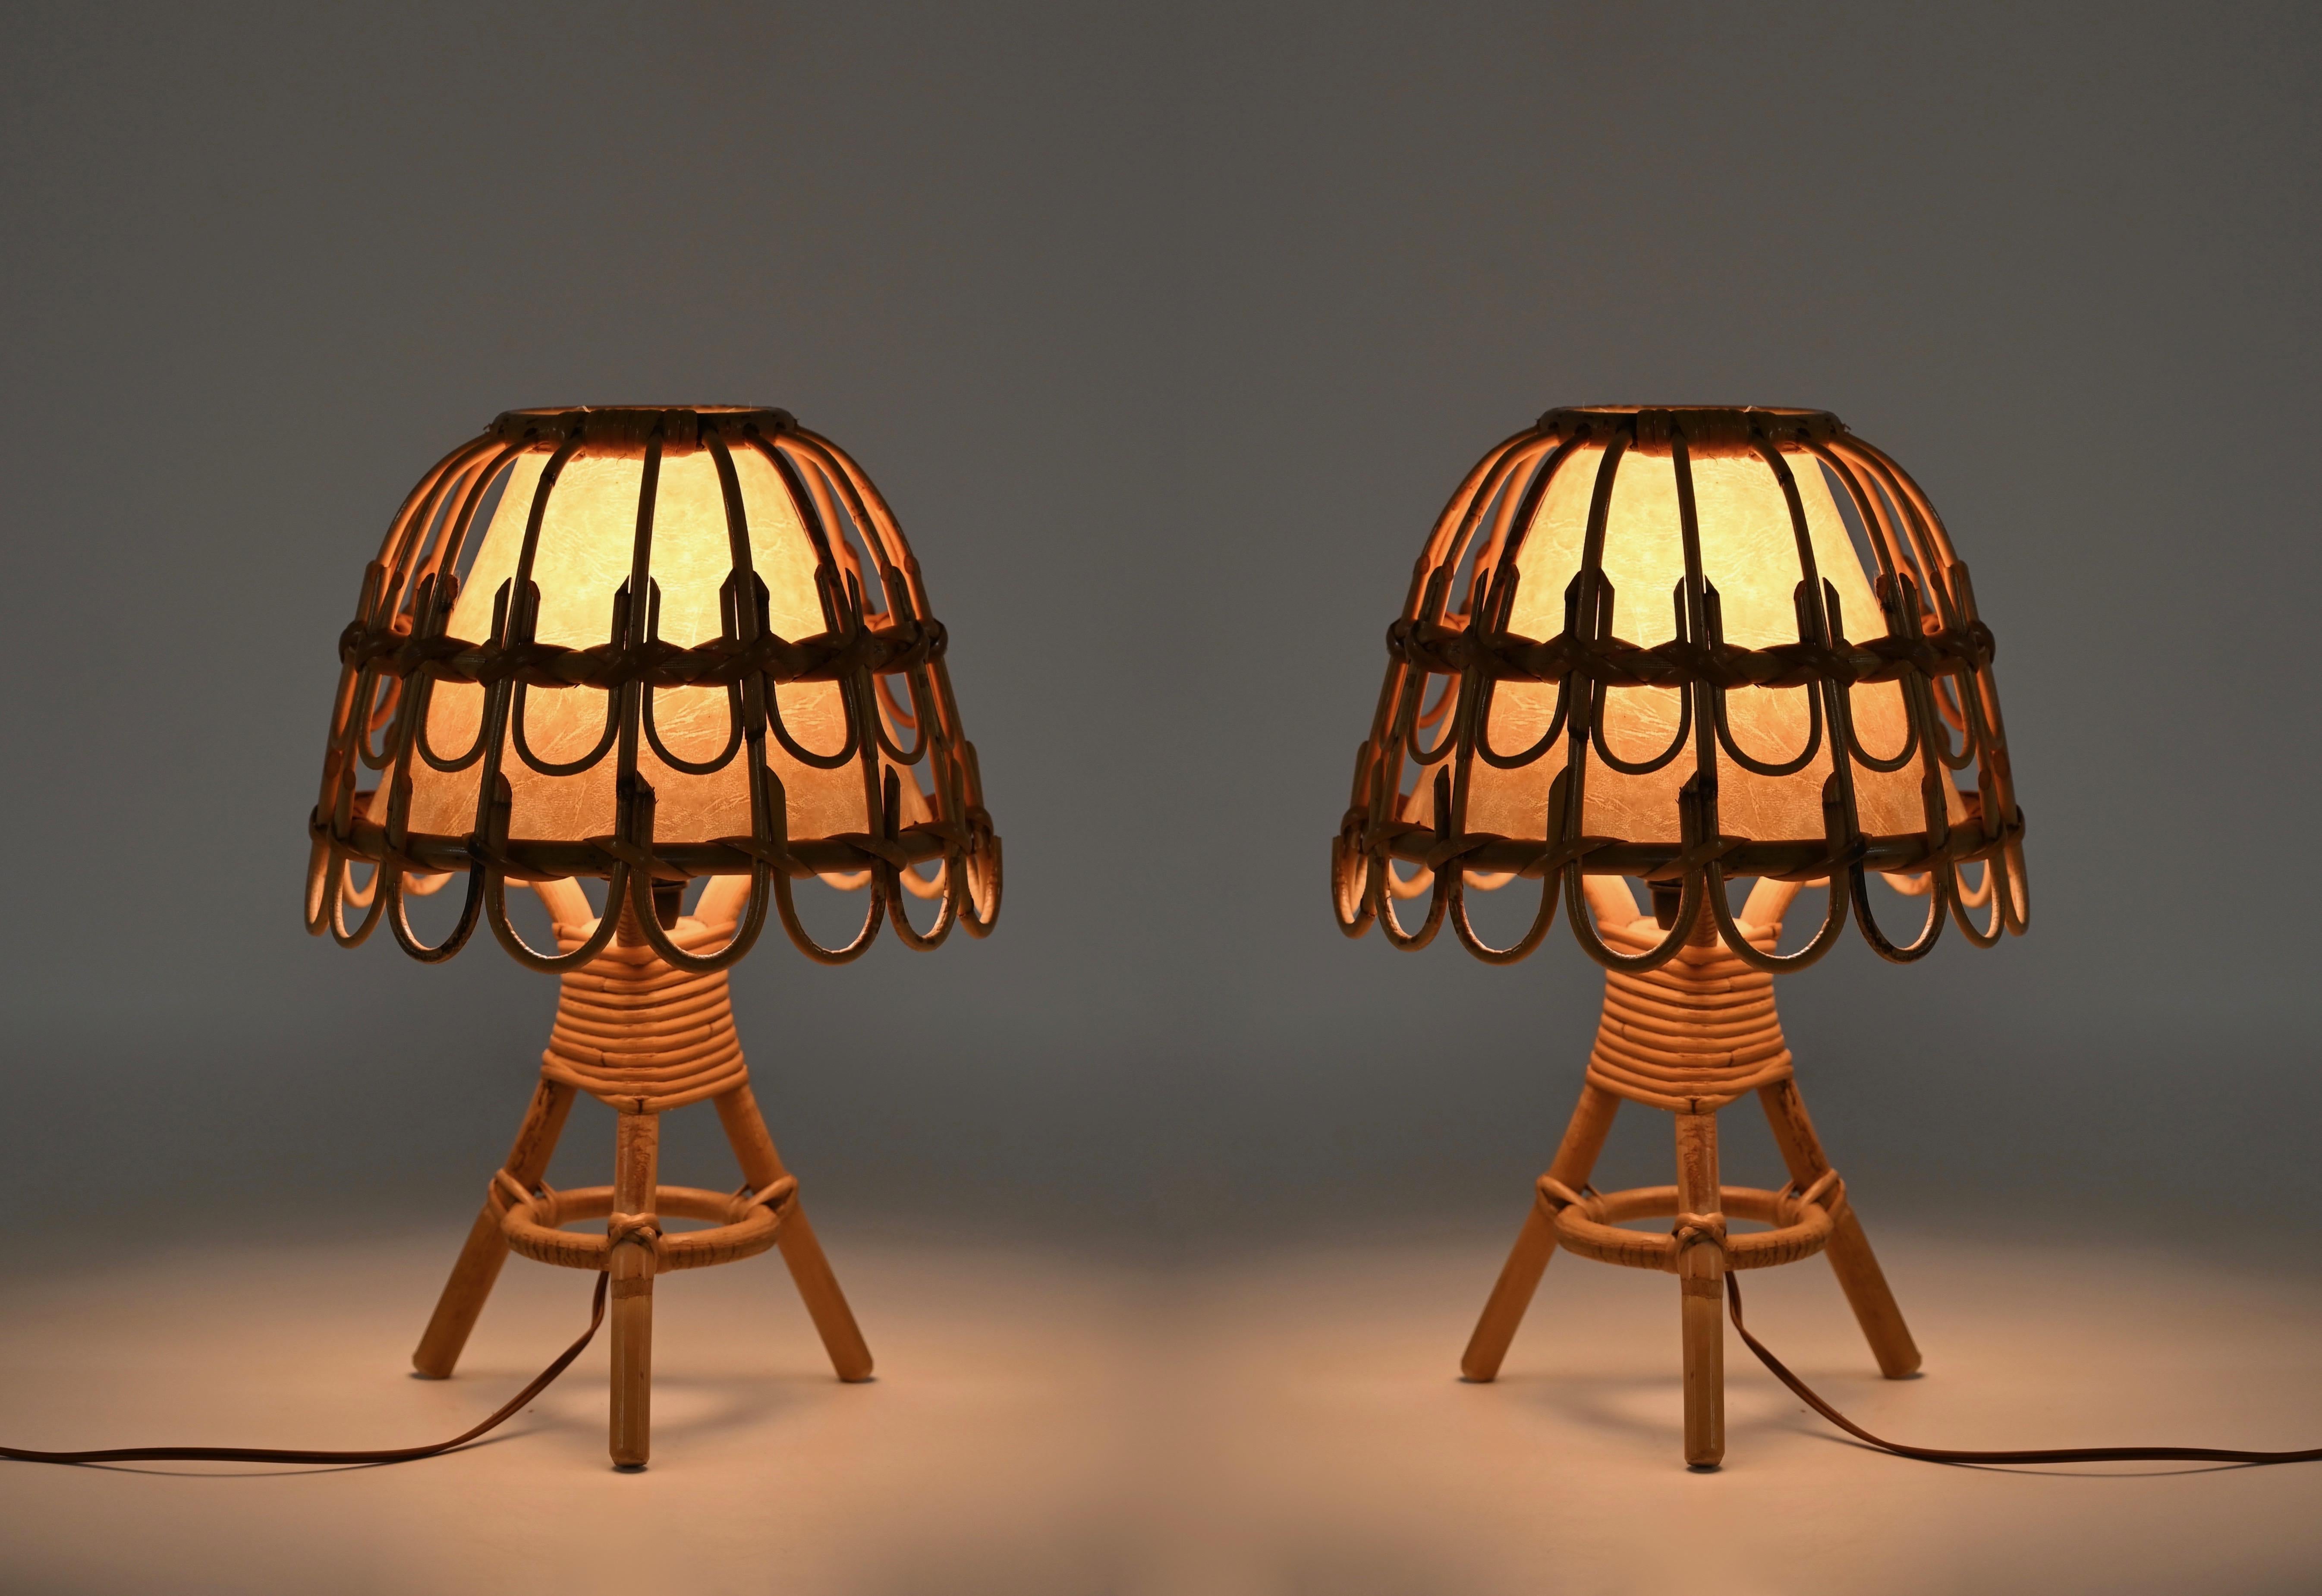 Gorgeous pair of Mid-Century French Riviera style table lamps made in curved rattan and hand-woven wicker. These fantastic lamps were made in France during the 1960s and are attributed to the mastery of Louis Sognot.  

The lamps are a clear example